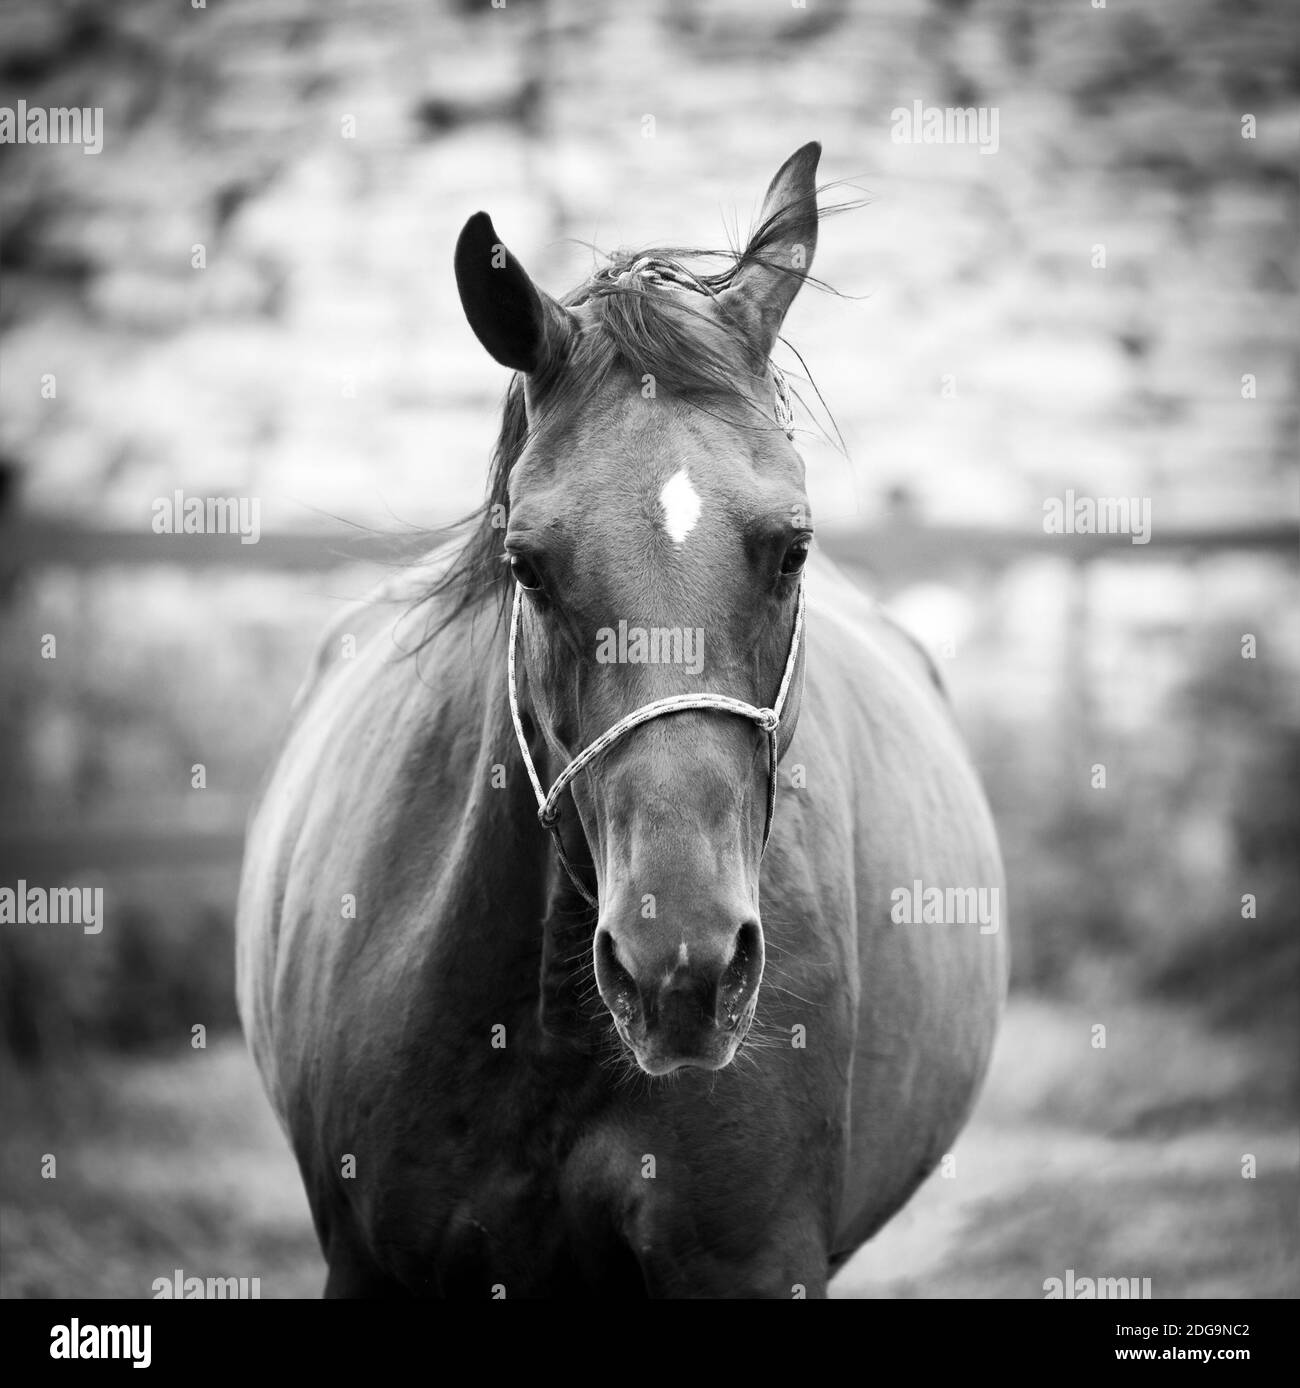 Horse in training portrait in black and white tones Stock Photo